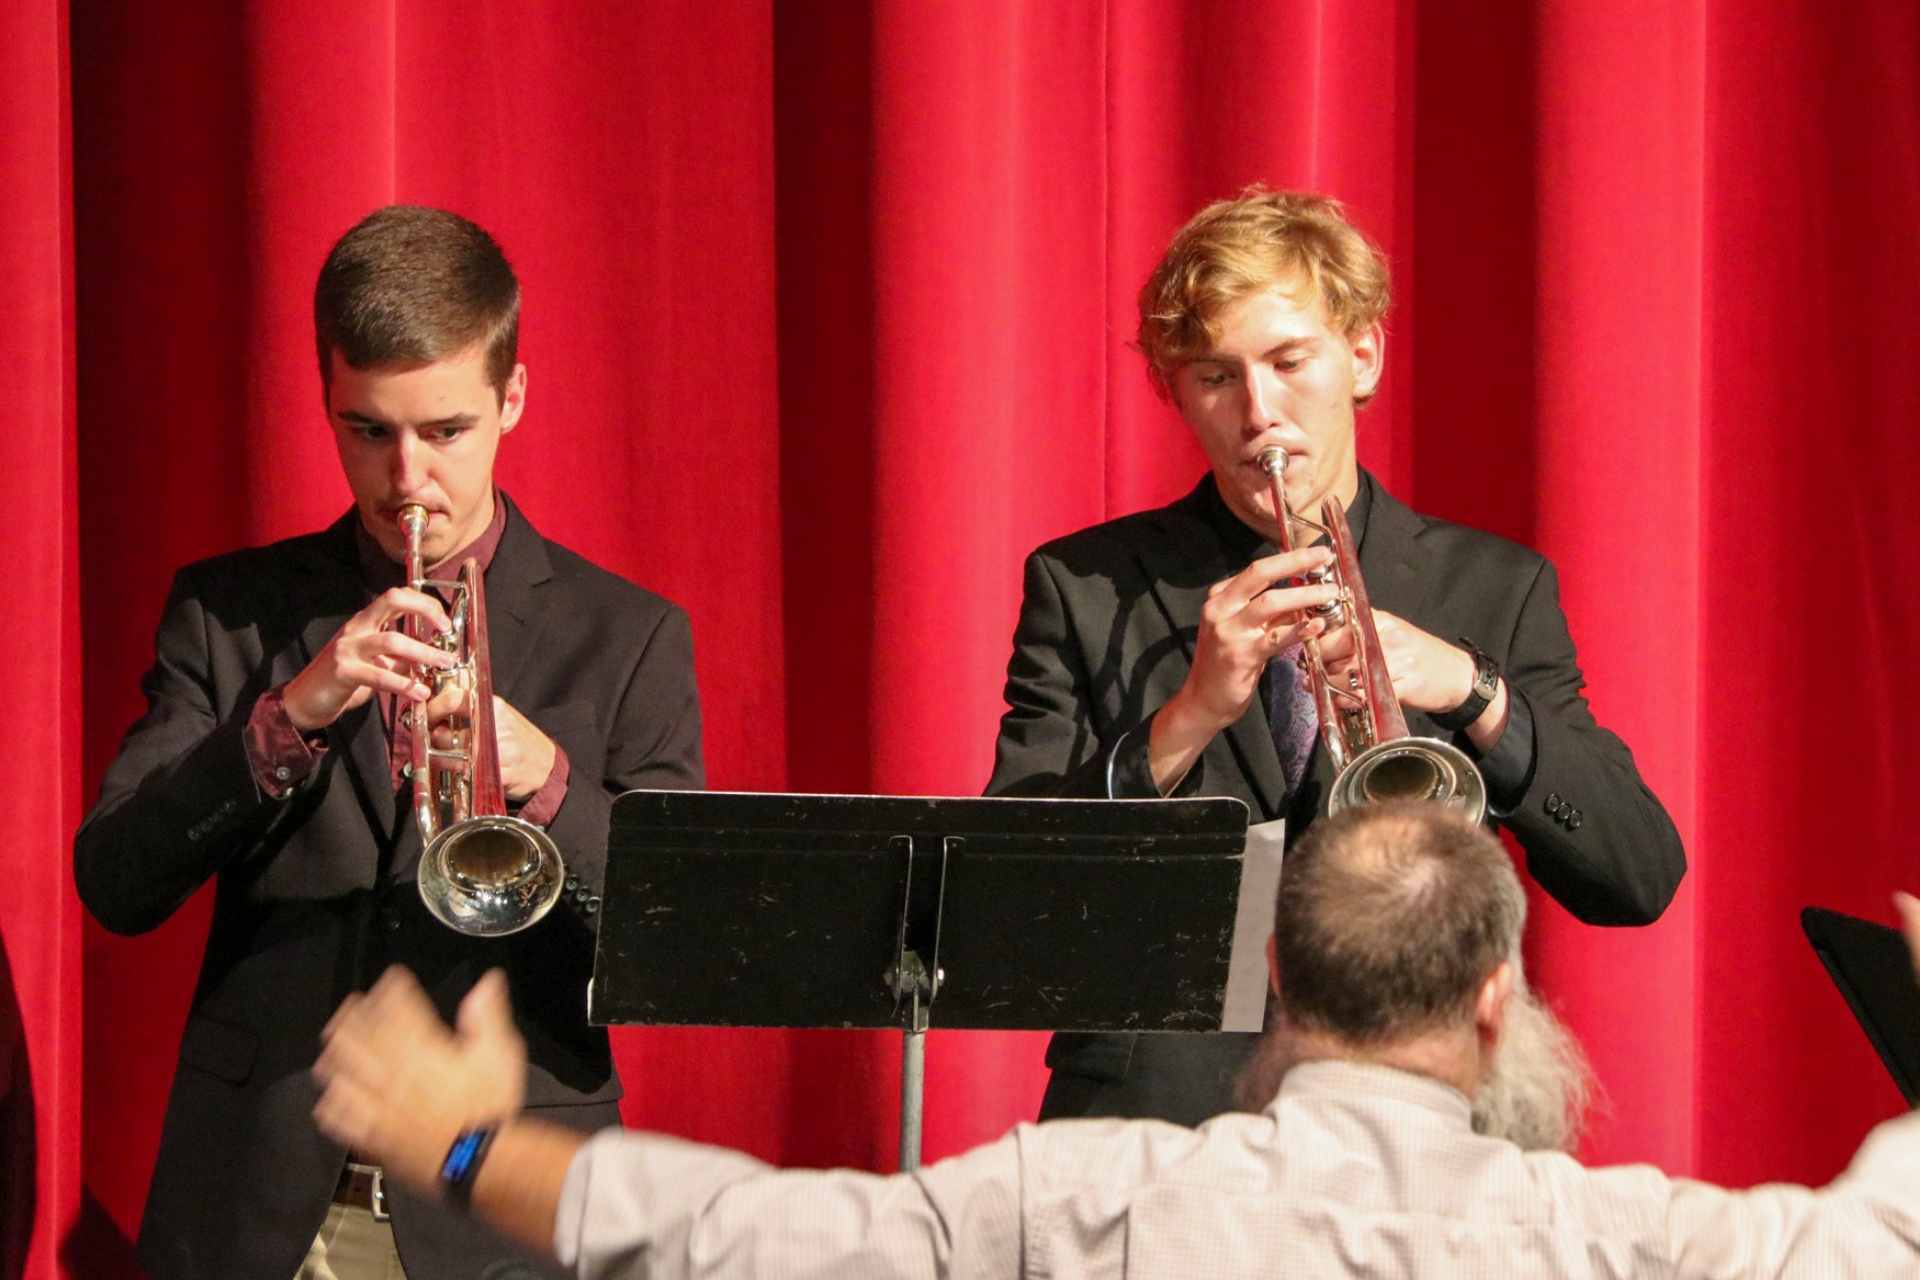 The annual Music Fest concert at Glenville State College is scheduled for Tuesday, October 12. The event features performances by several GSC ensembles, including trumpet ensemble (pictured), marching band, bluegrass band, jazz band, saxophone ensemble, concert choir, and more.